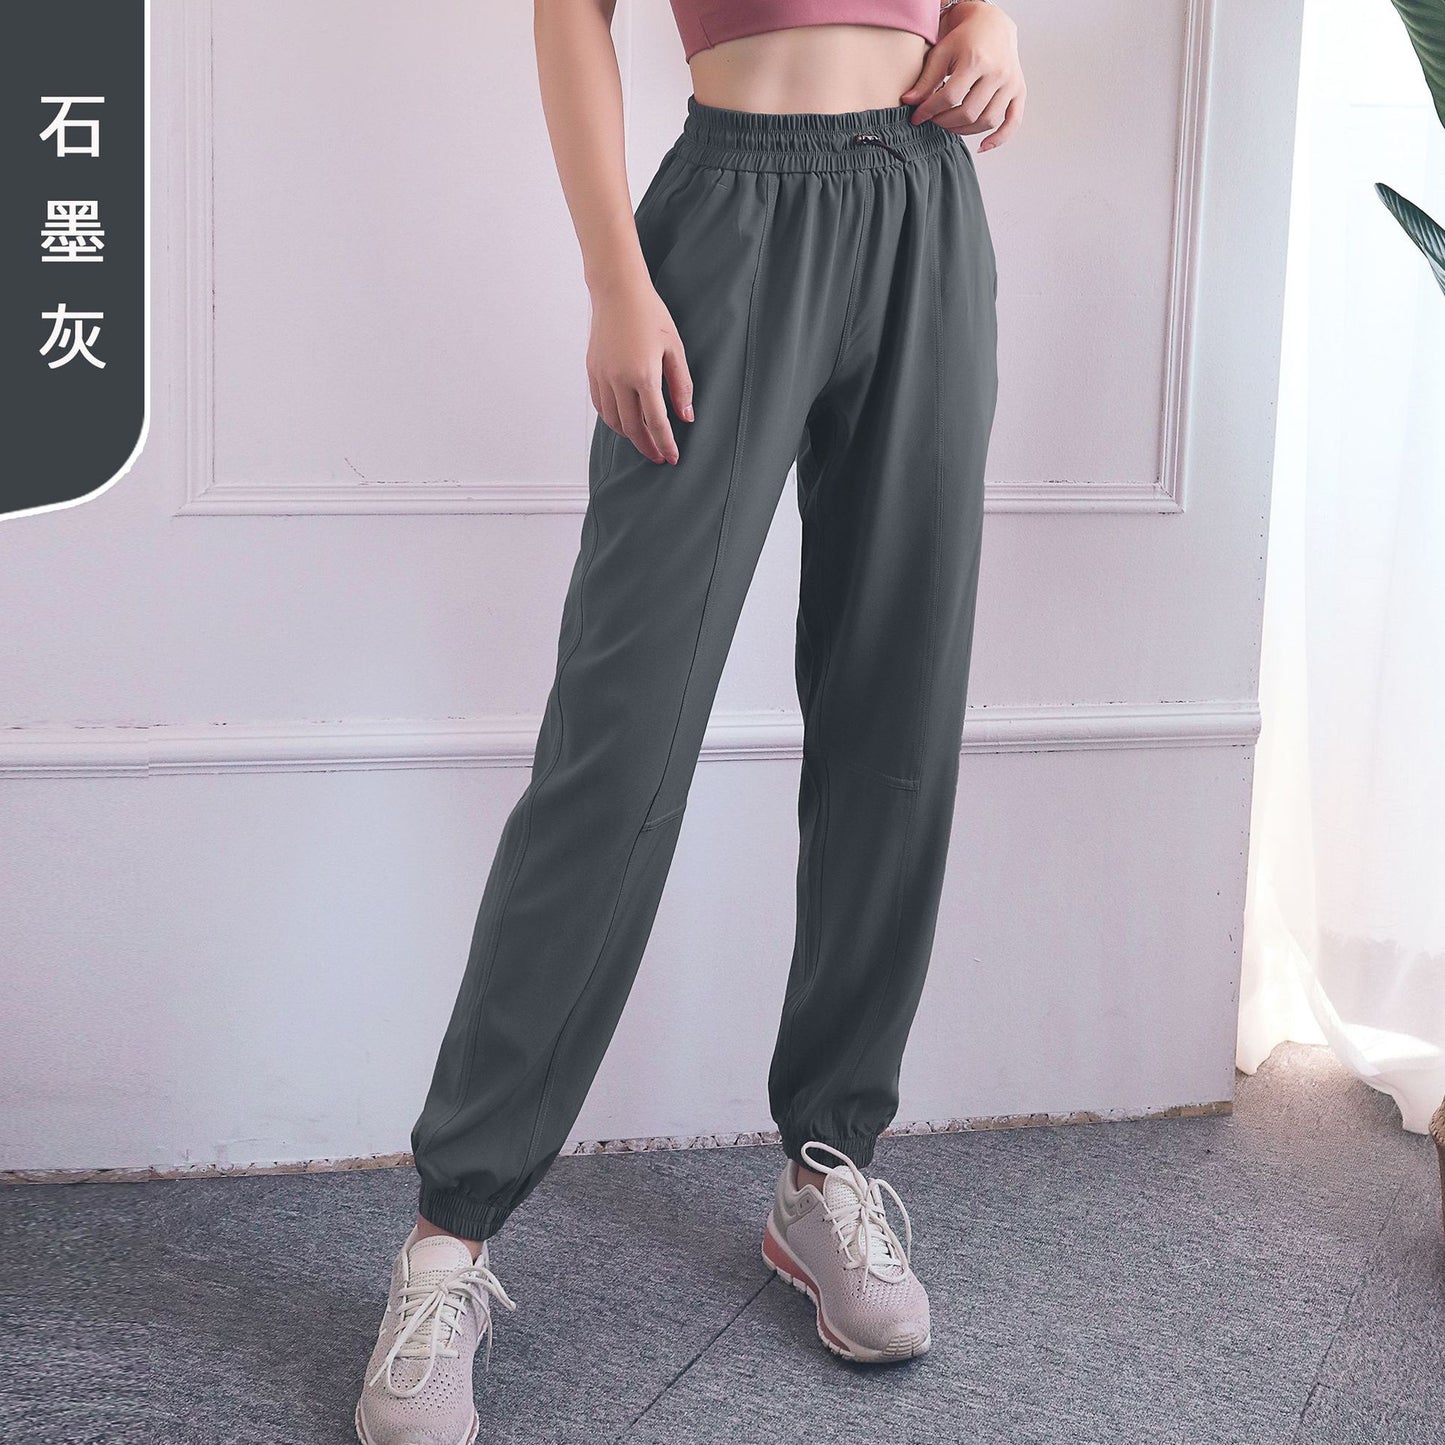 2021 new European and American loose leisure sports running quick-drying fitness pants high waist training Peach Hip pants fouregg